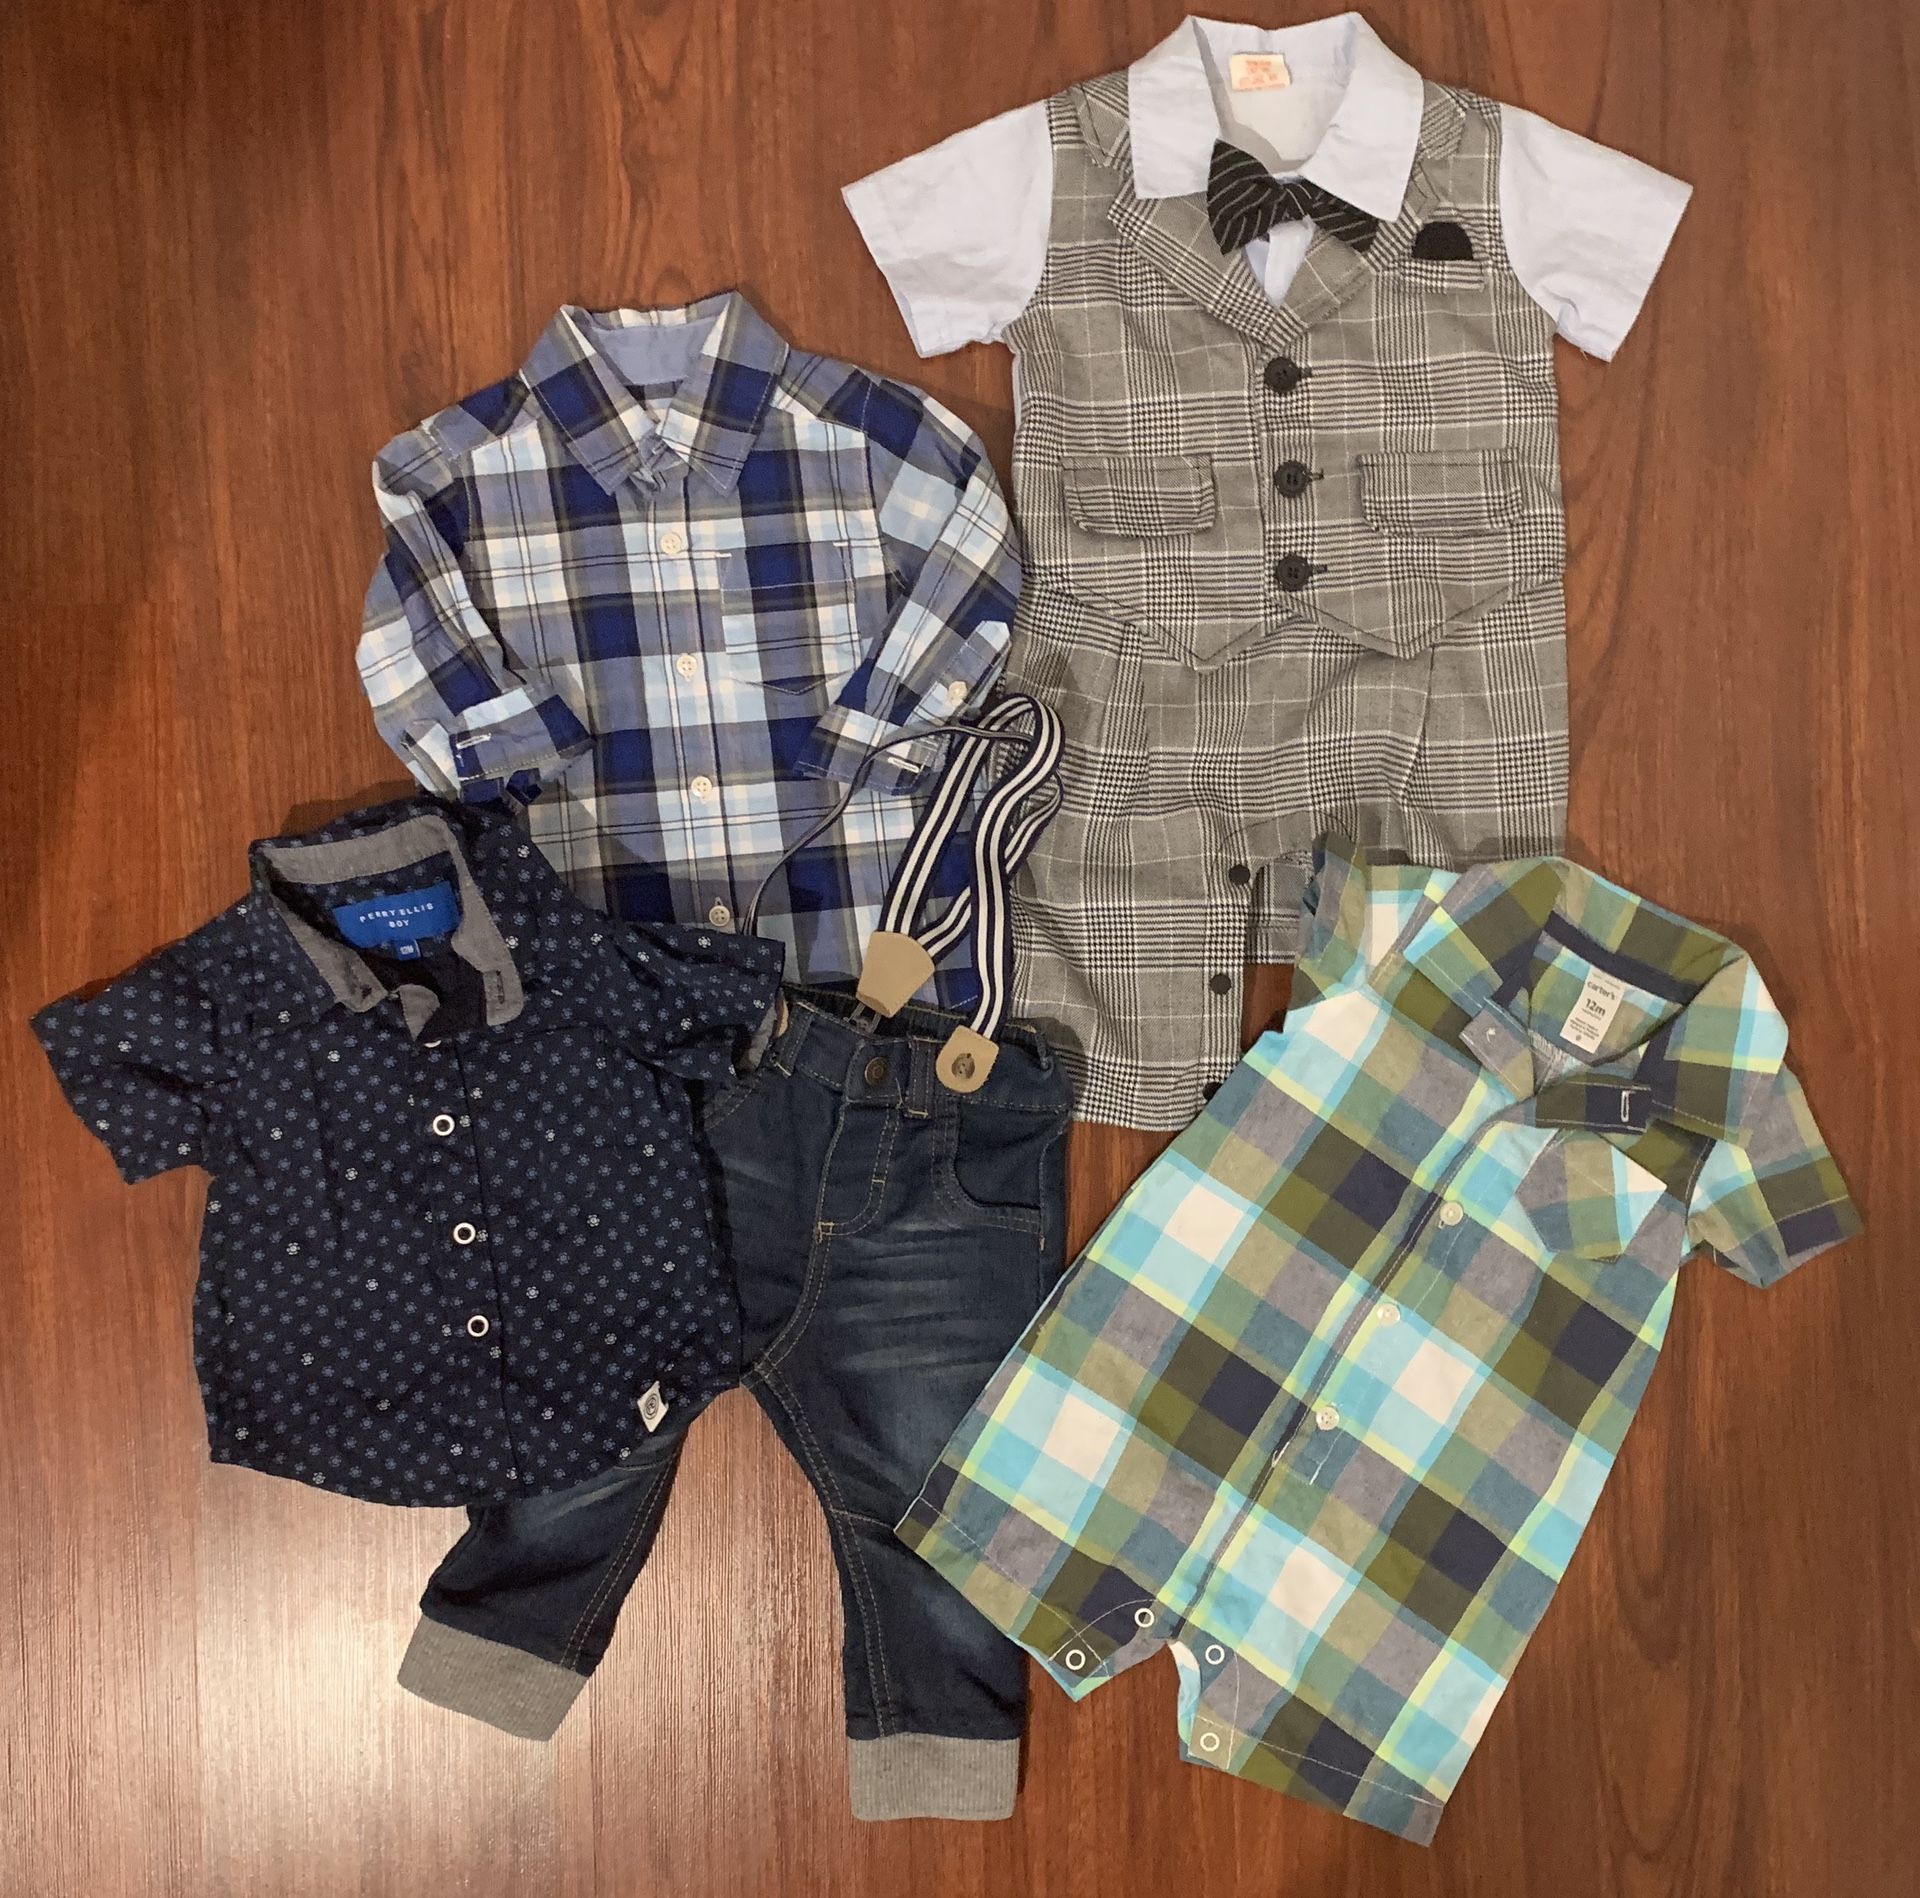 Baby Boy Clothes (5 pc) 12 months $15